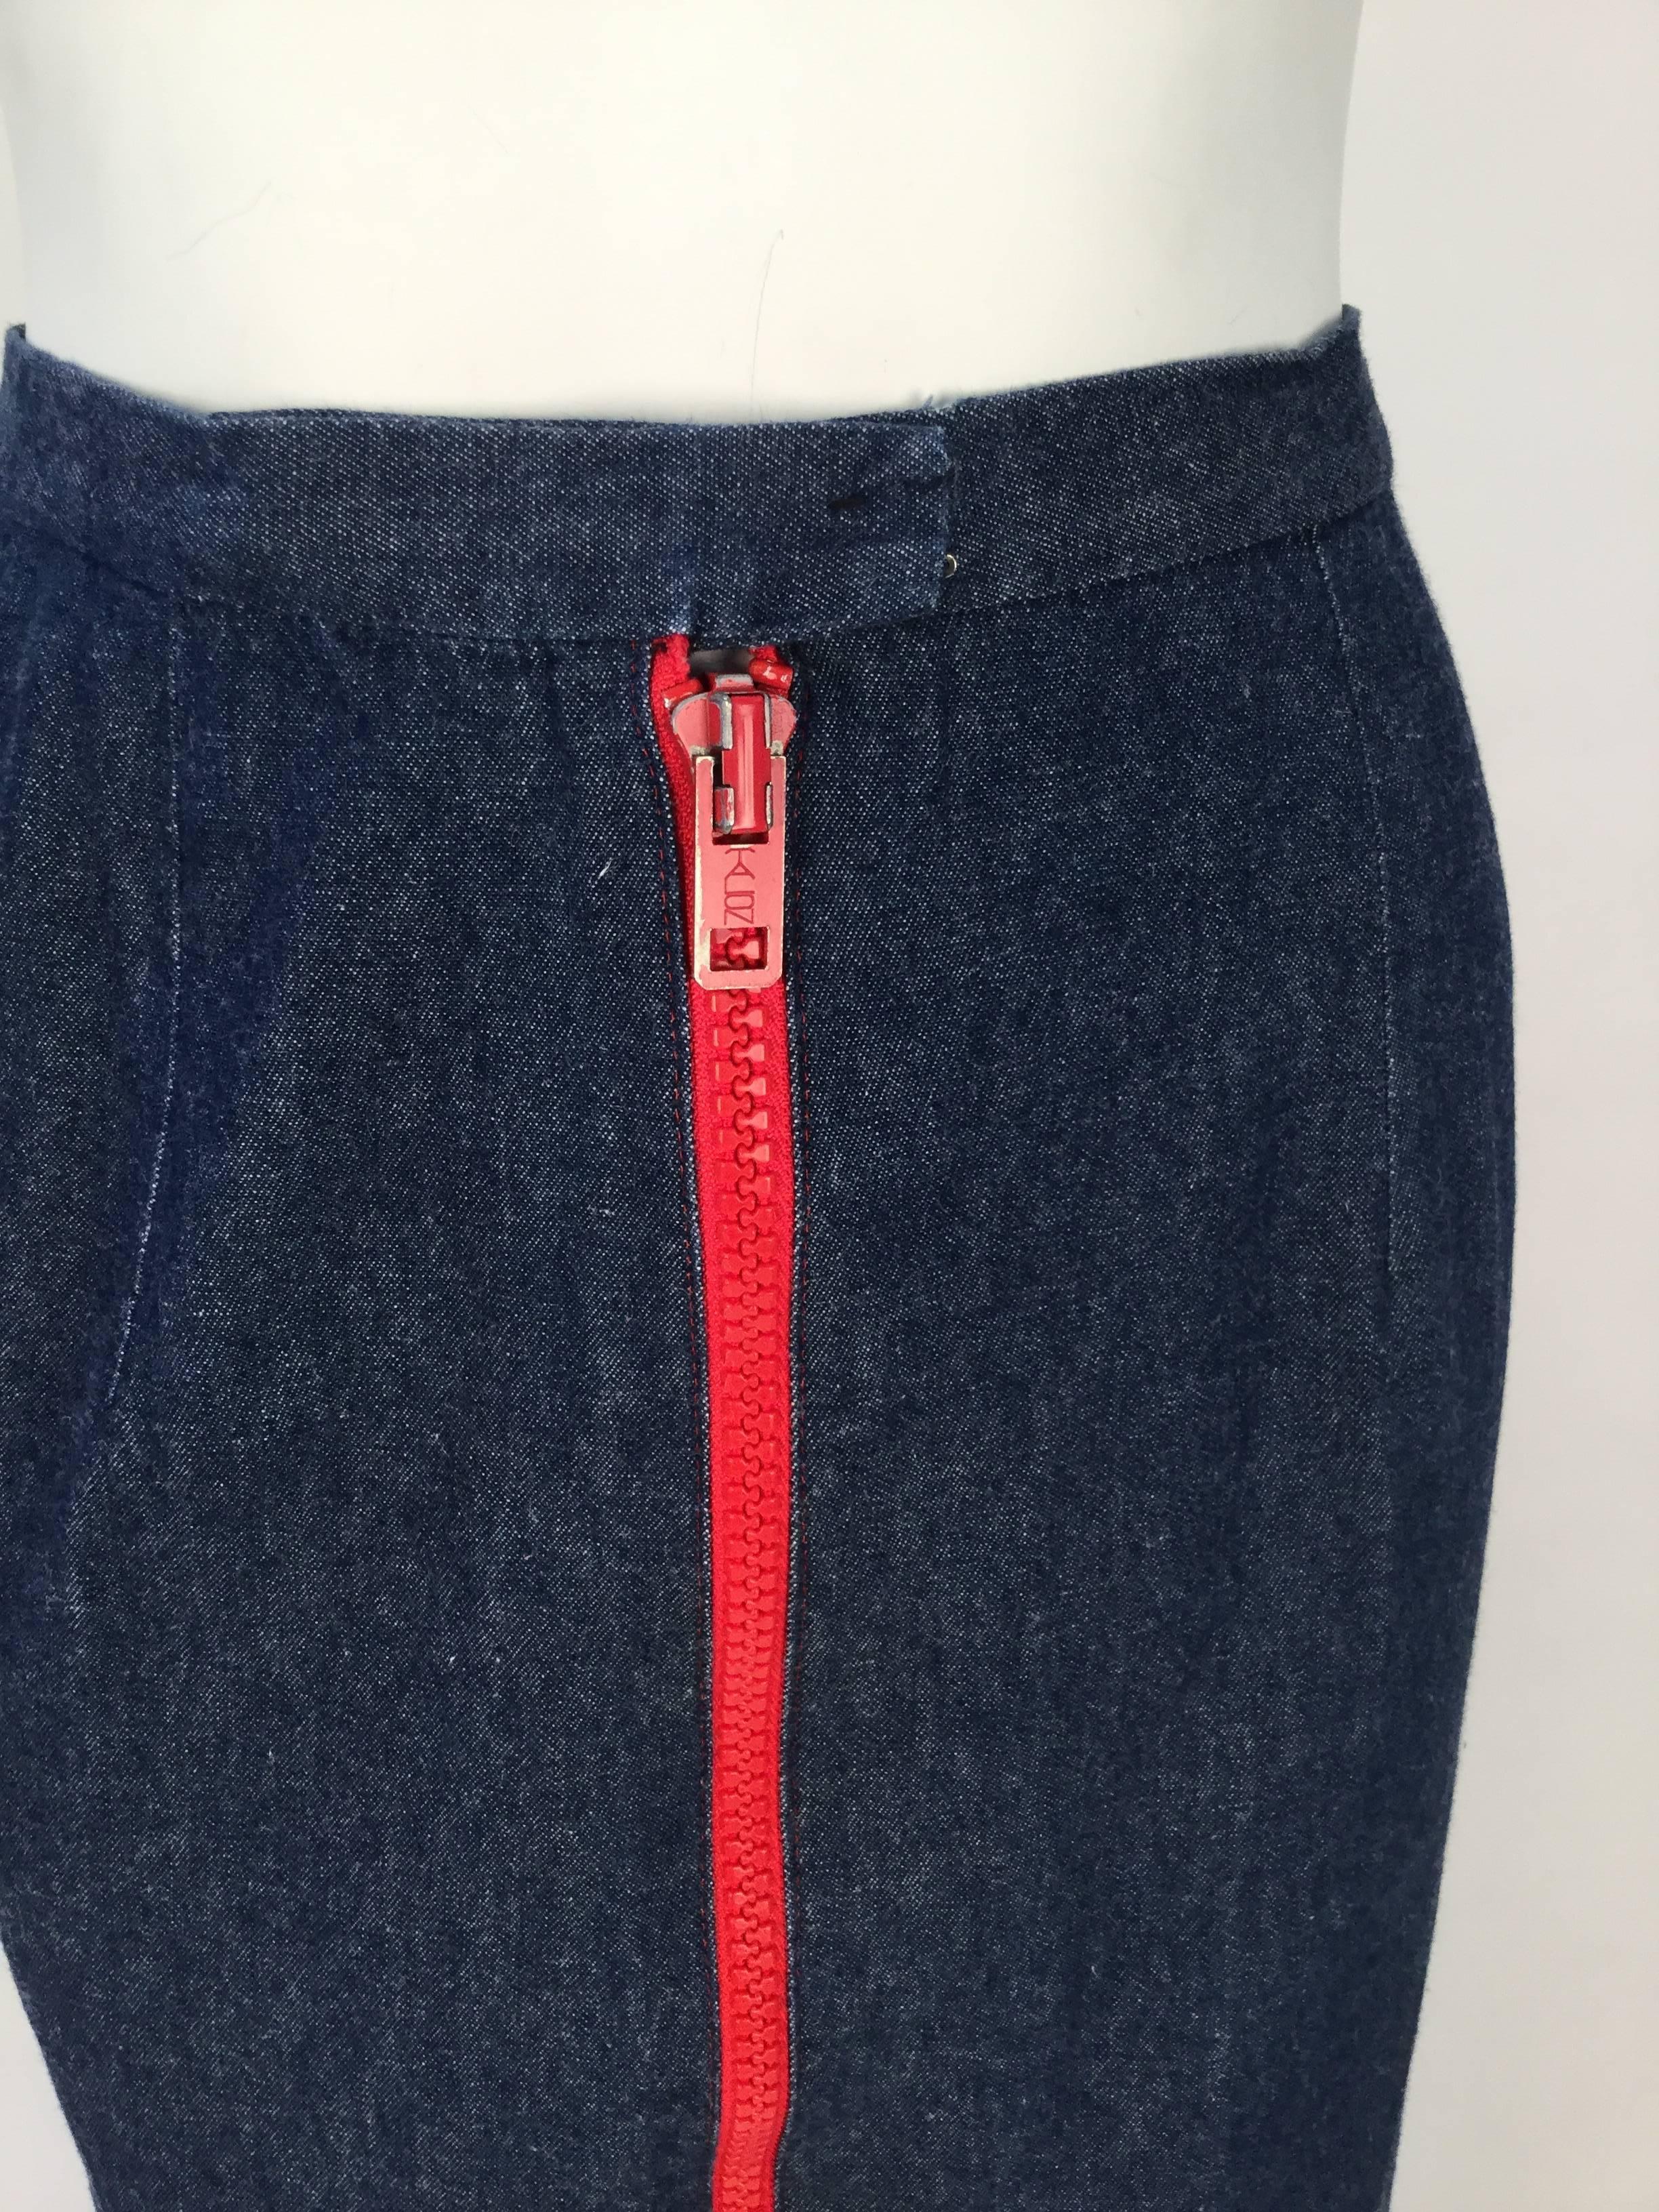 1970's faded dark wash denim midi skirt from Geoffrey Beene's 'The Beene Bag' line. Center front hook and eye closure. There is a large red metal and plastic two-way zipper that zips down center front. Red top stitching at bottom hem and by the